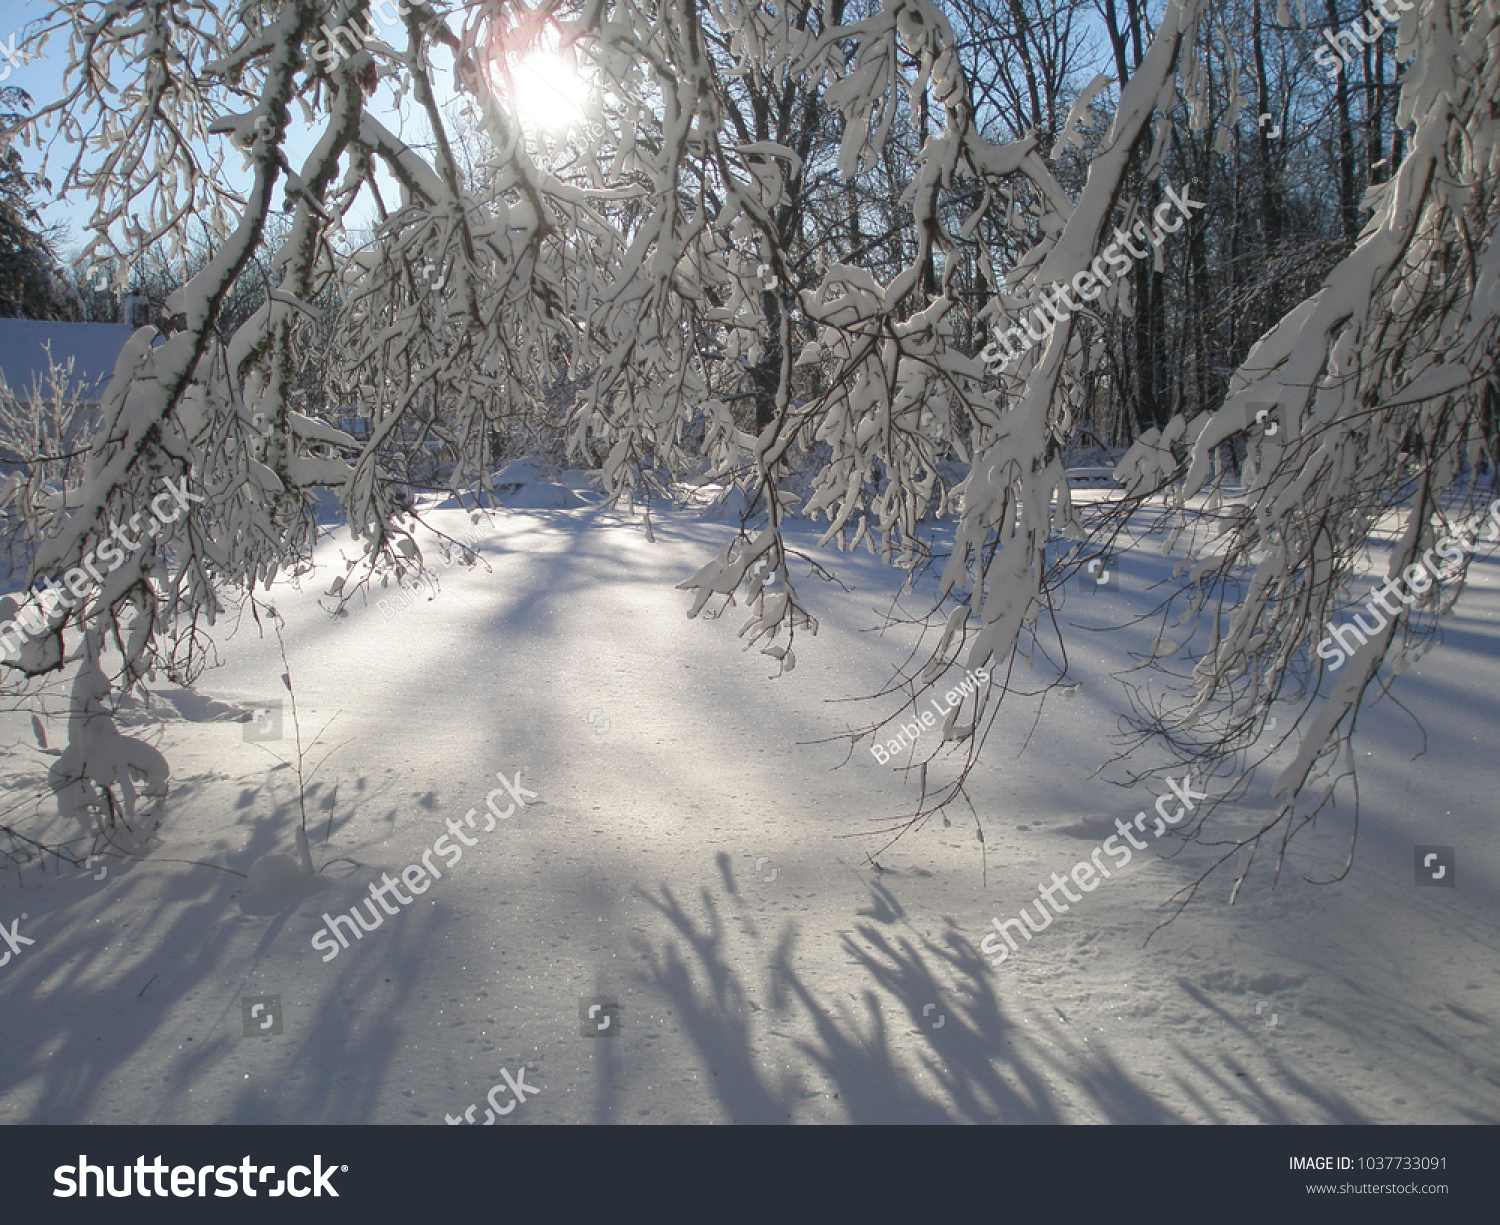 A winter landscape with snowy branches casting shadows against a sunny blue sky #1037733091